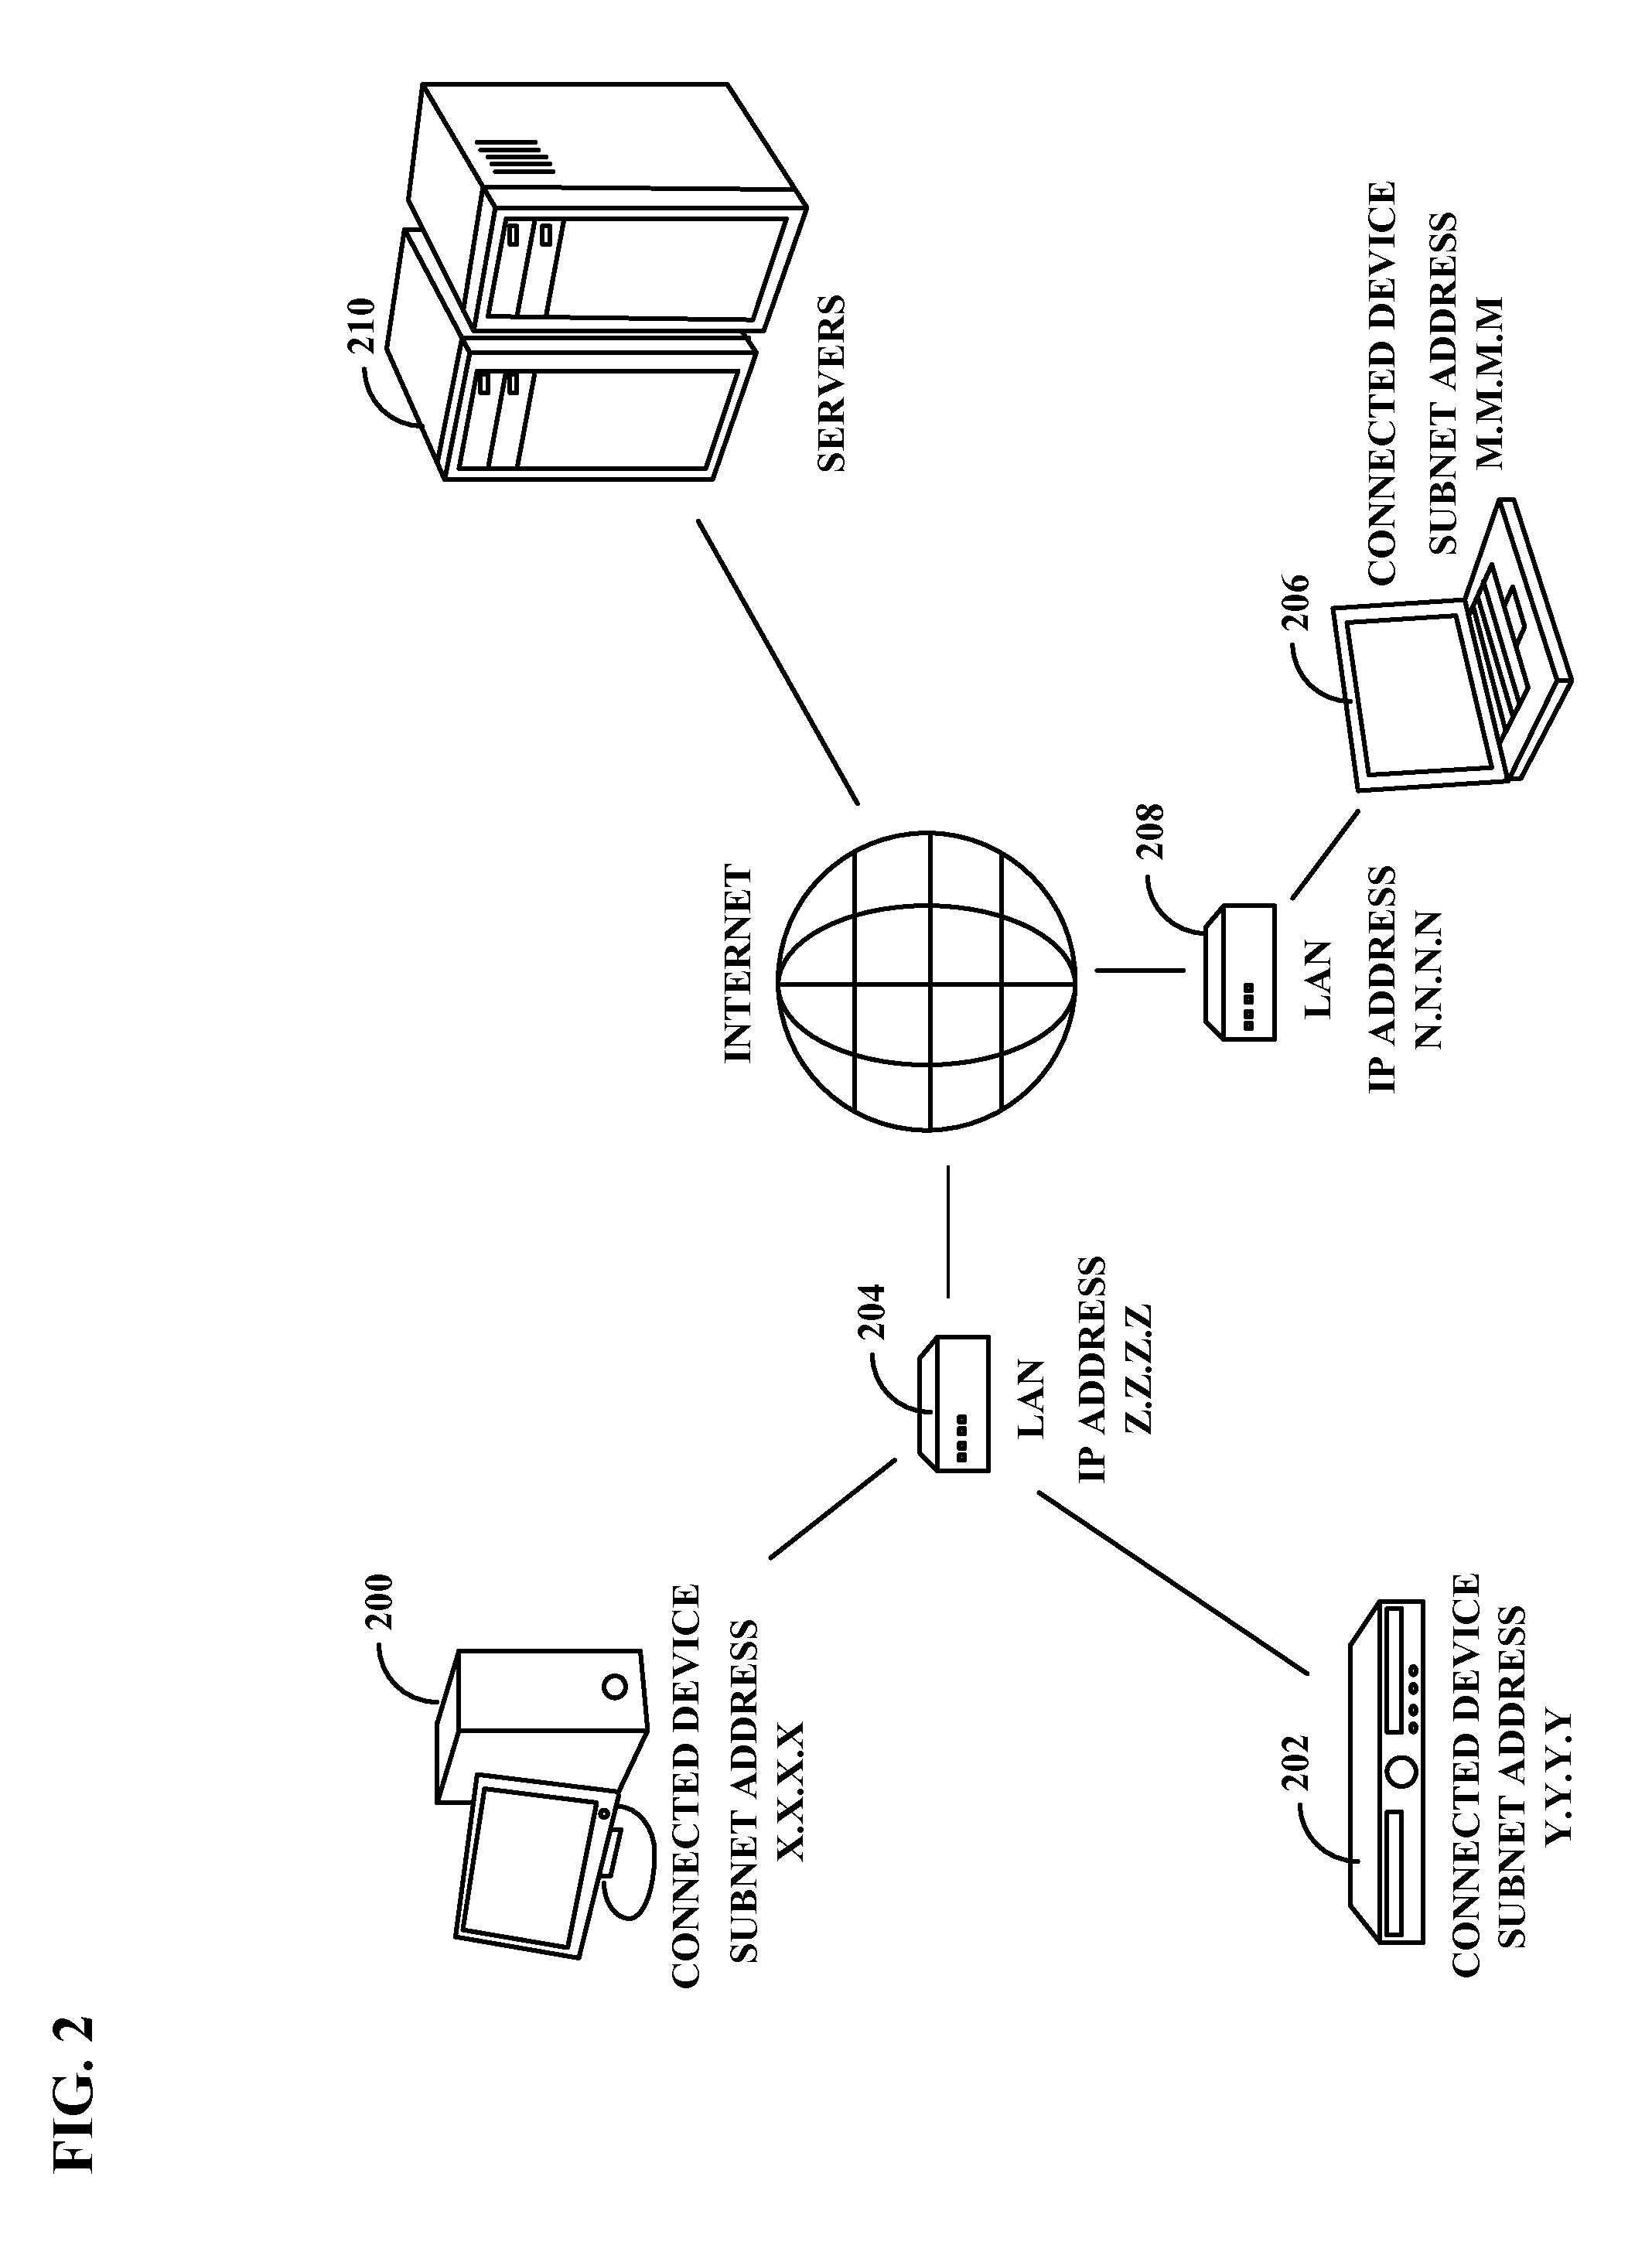 Device interconnection and service discovery via a communication cloud